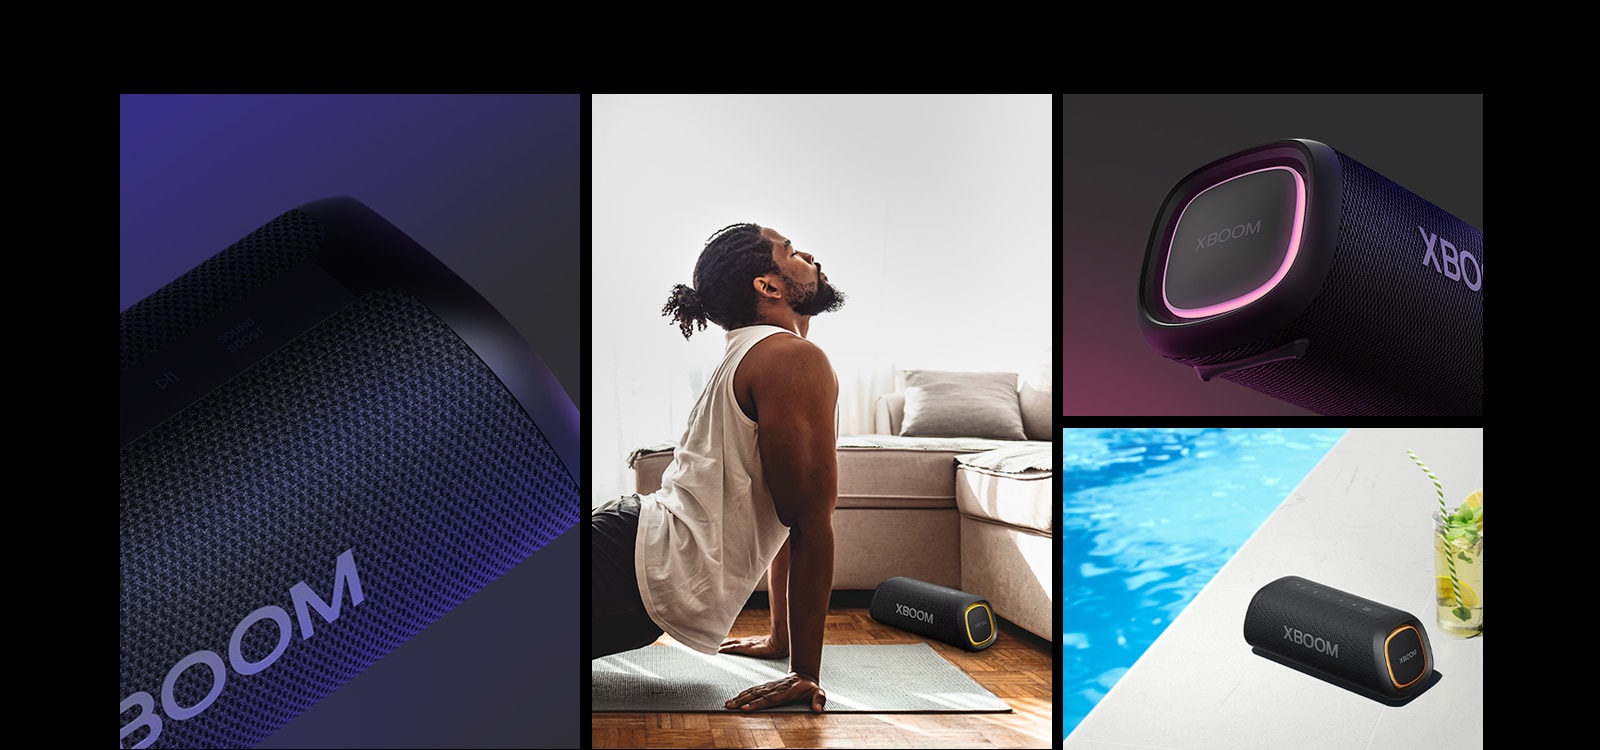 College. From left, close up view of LG XBOOM Go XG5. Next, an image of a man doing yoga, on top of the matt LG XBOOM Go XG5 is placed. On the right from top to bottom: close-up view of the speaker with pink lighting. The speaker with orange lighting and a lemonade are placed on the poolside.